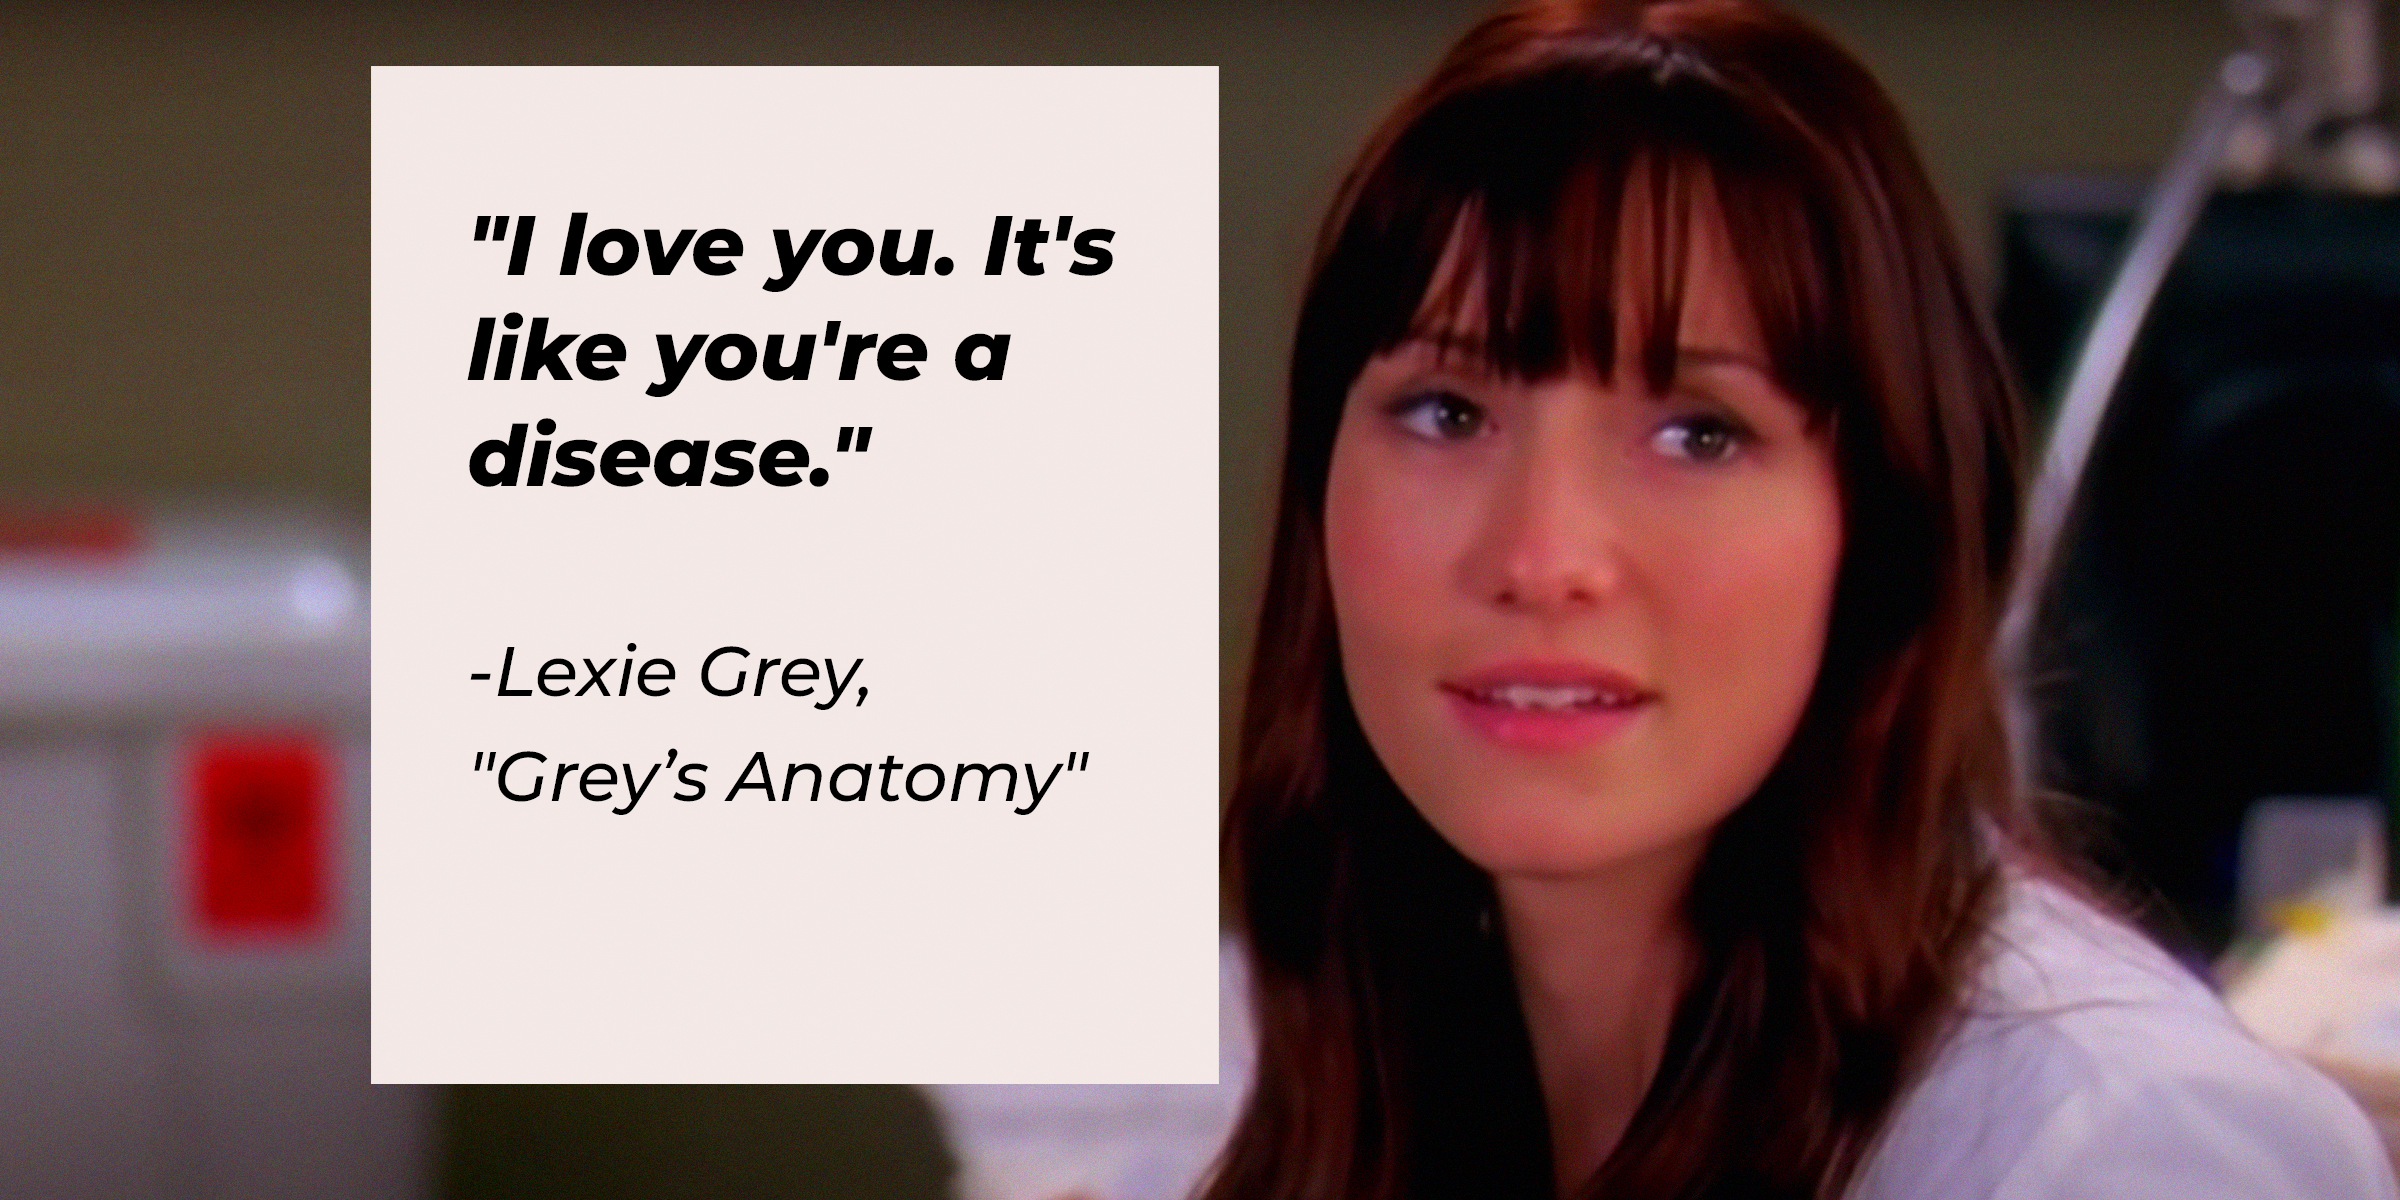 Lexie Grey with her quote: "I love you. It's like you're a disease." | Source: Facebook.com/GreysAnatomy